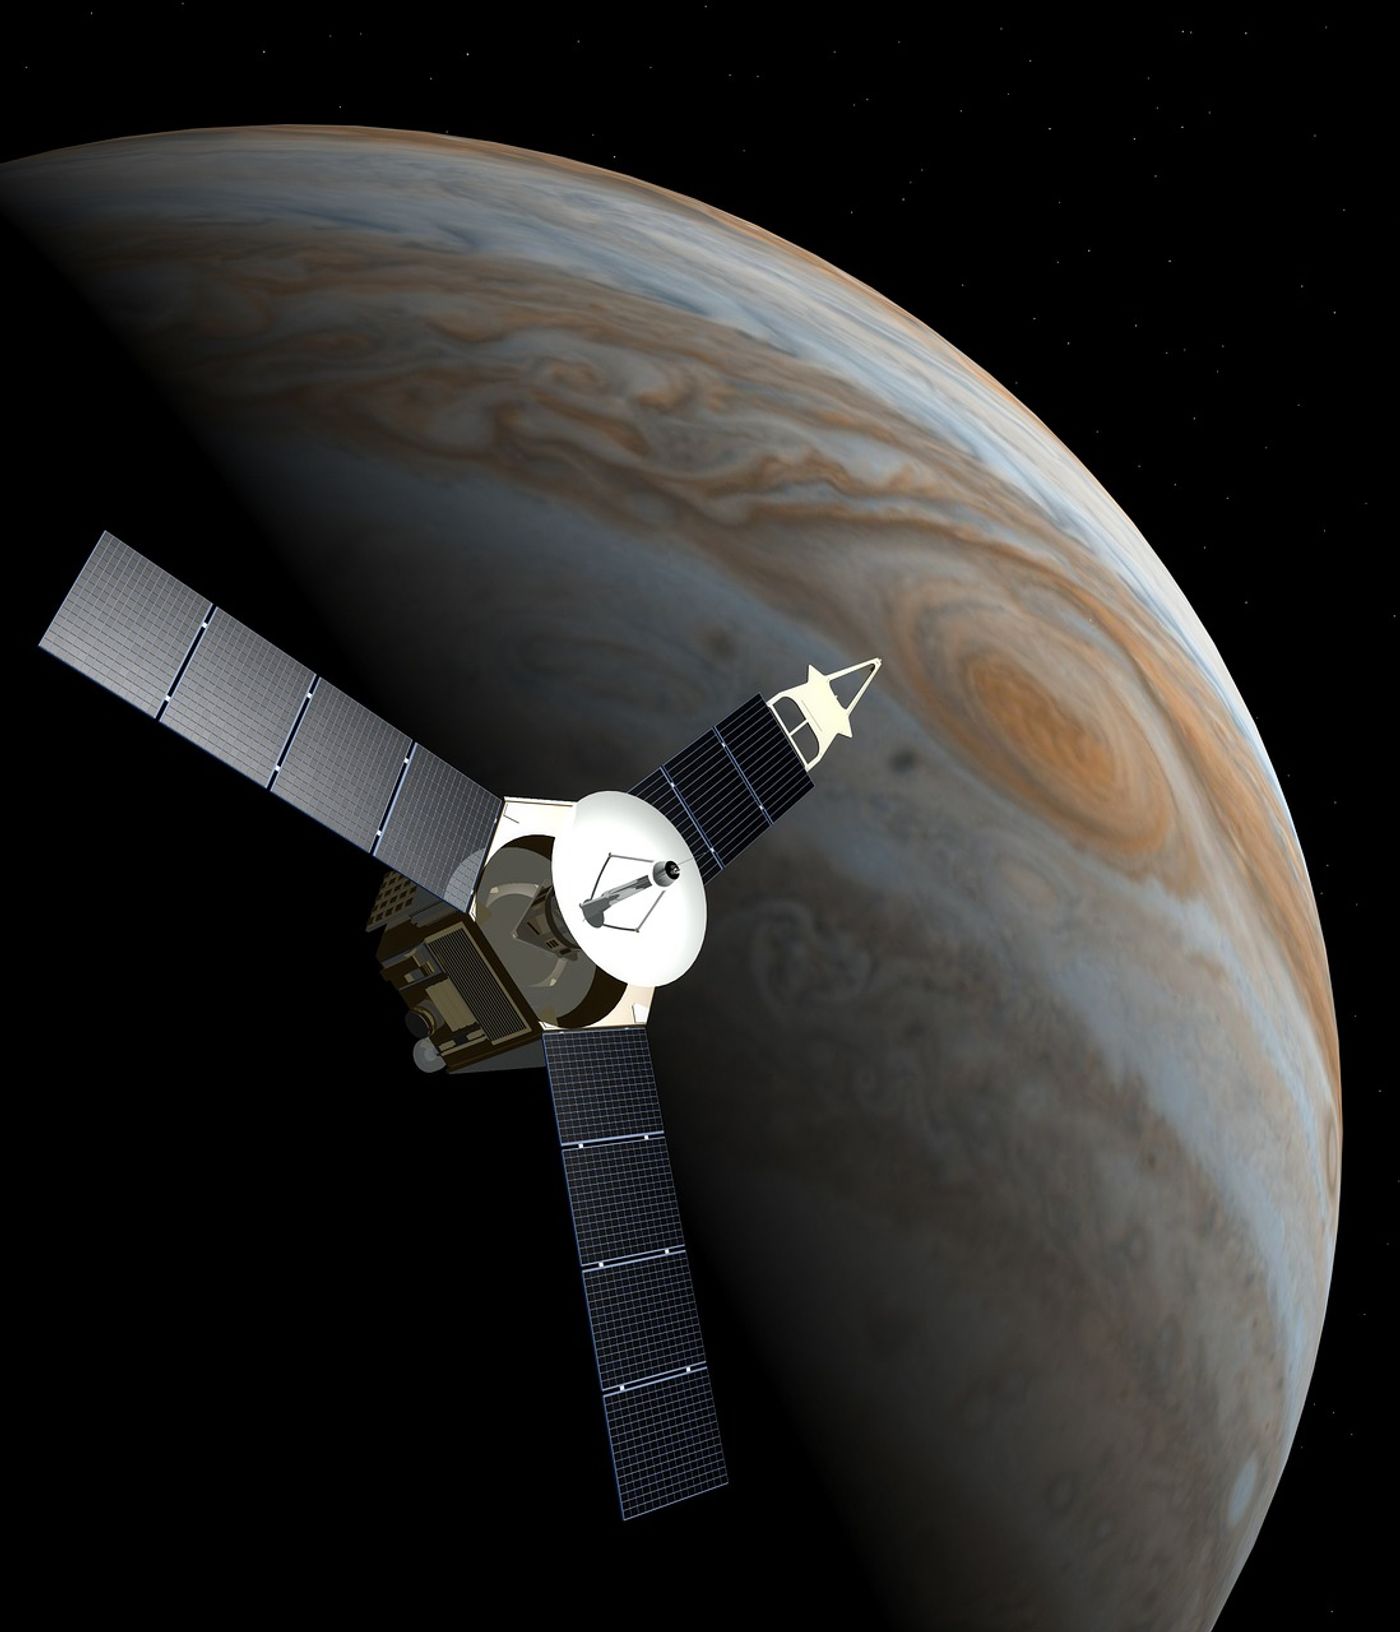 An artist's impression of the Juno spacecraft as it orbits Jupiter.